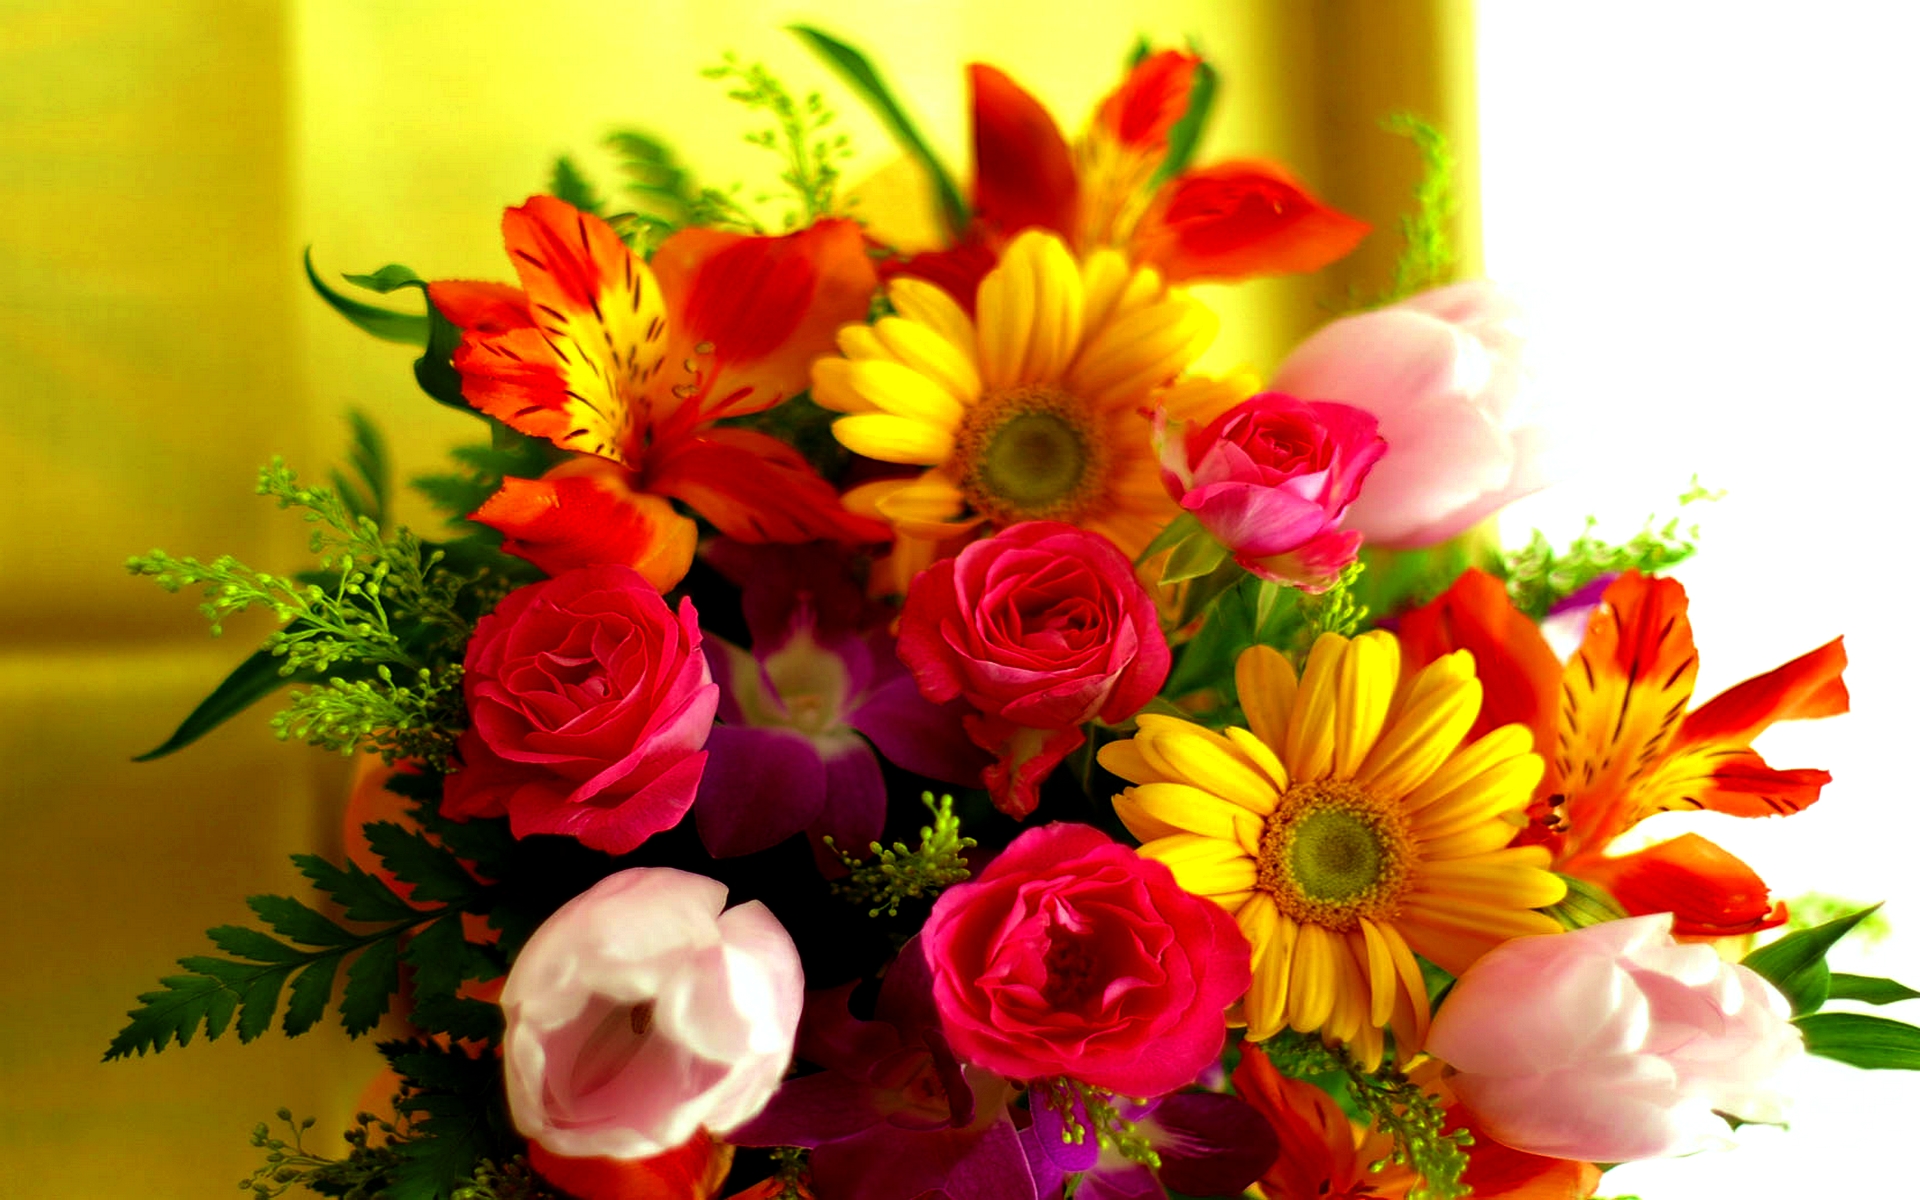 Flower Bouquet Flowers Image Of